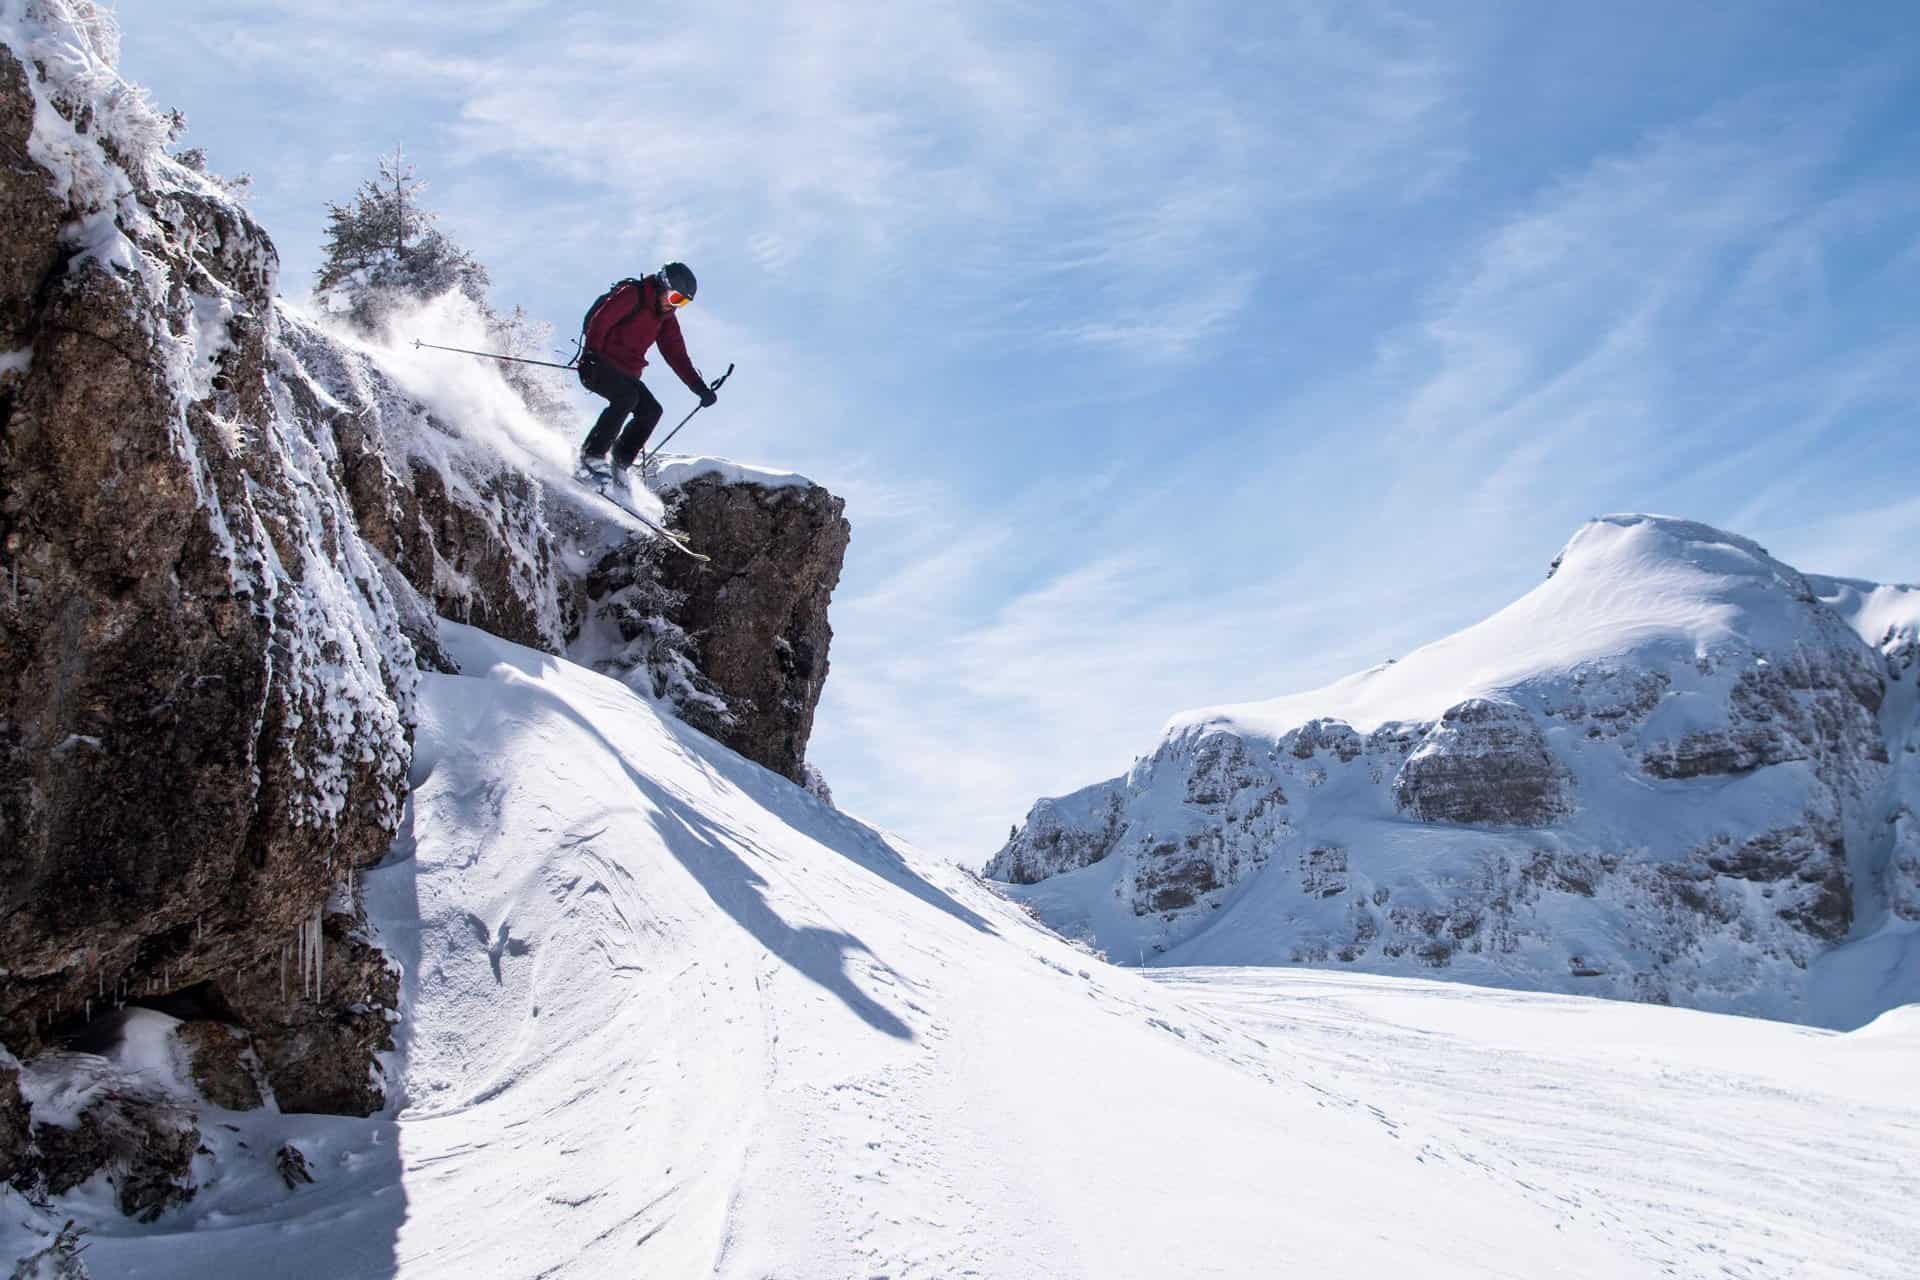 A skier jumping off a small cliff